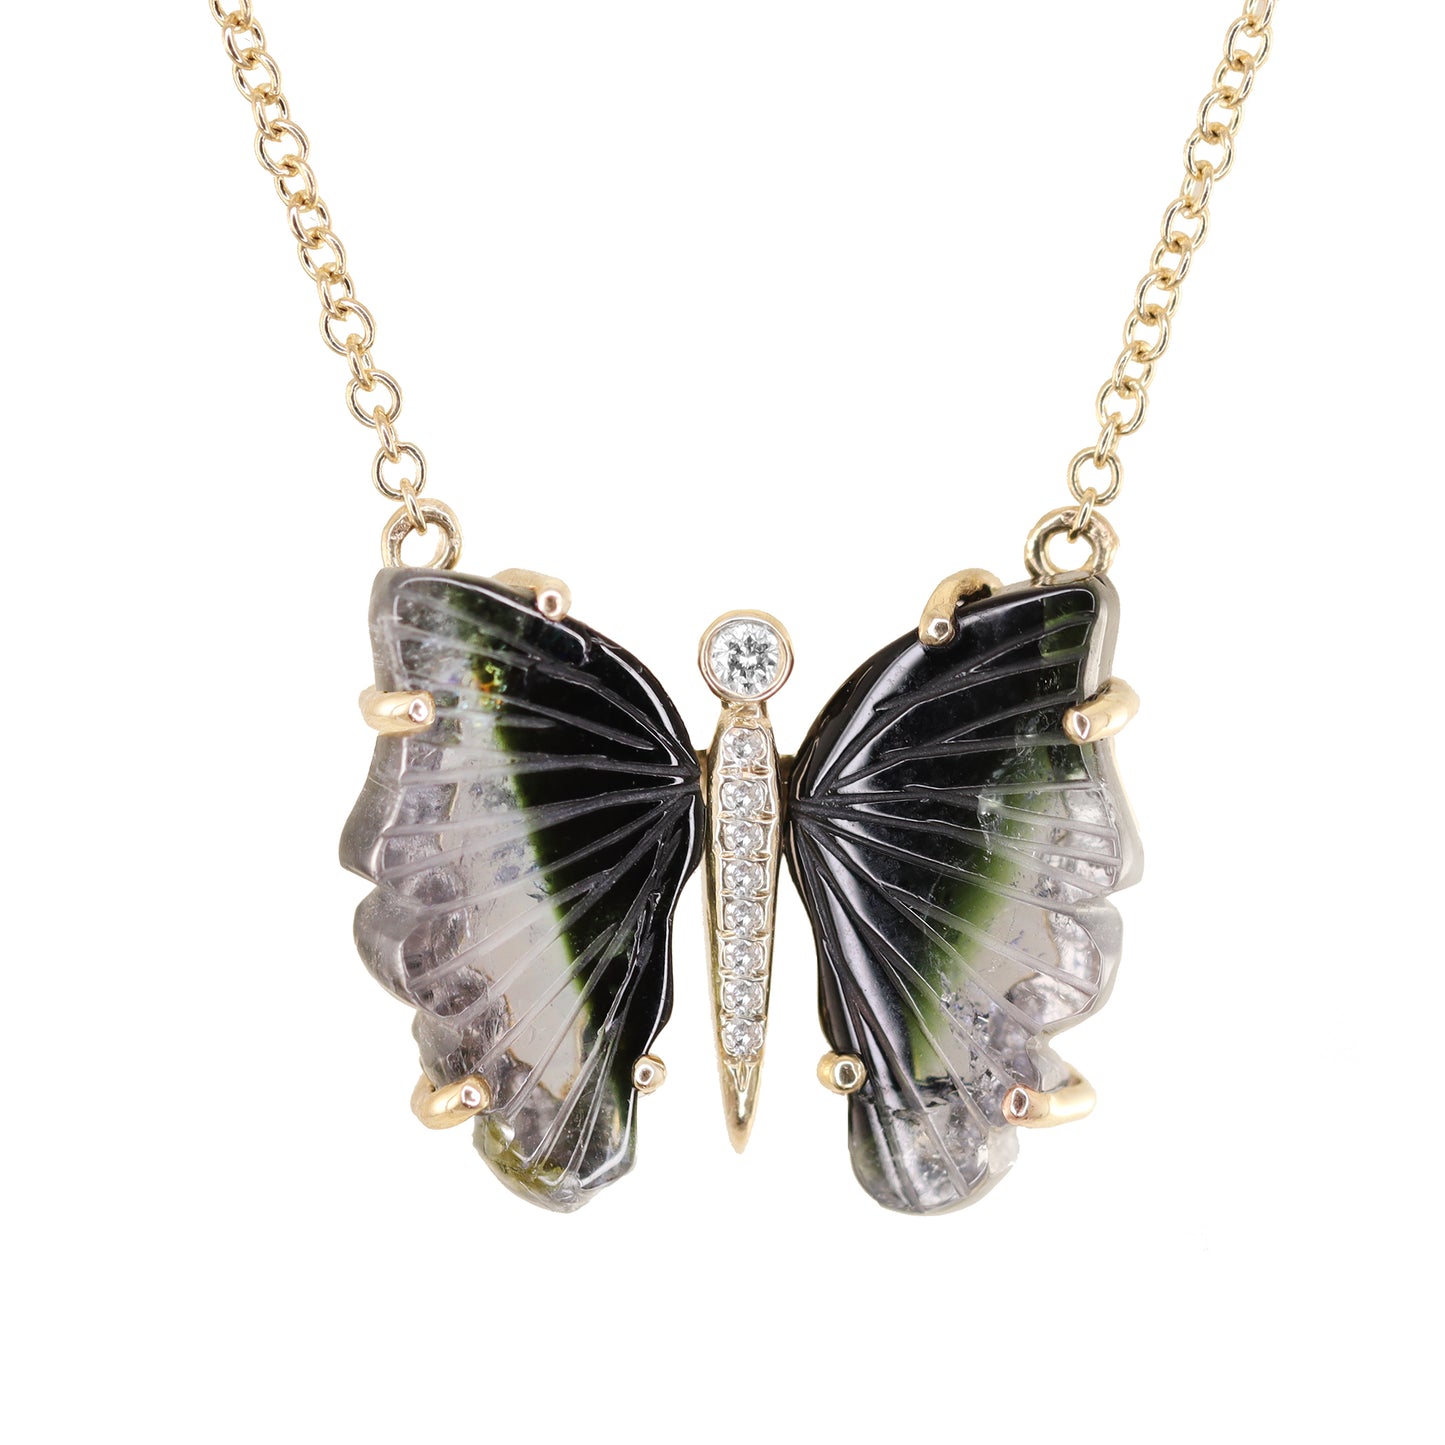 14kt gold and diamond tourmaline butterfly necklace